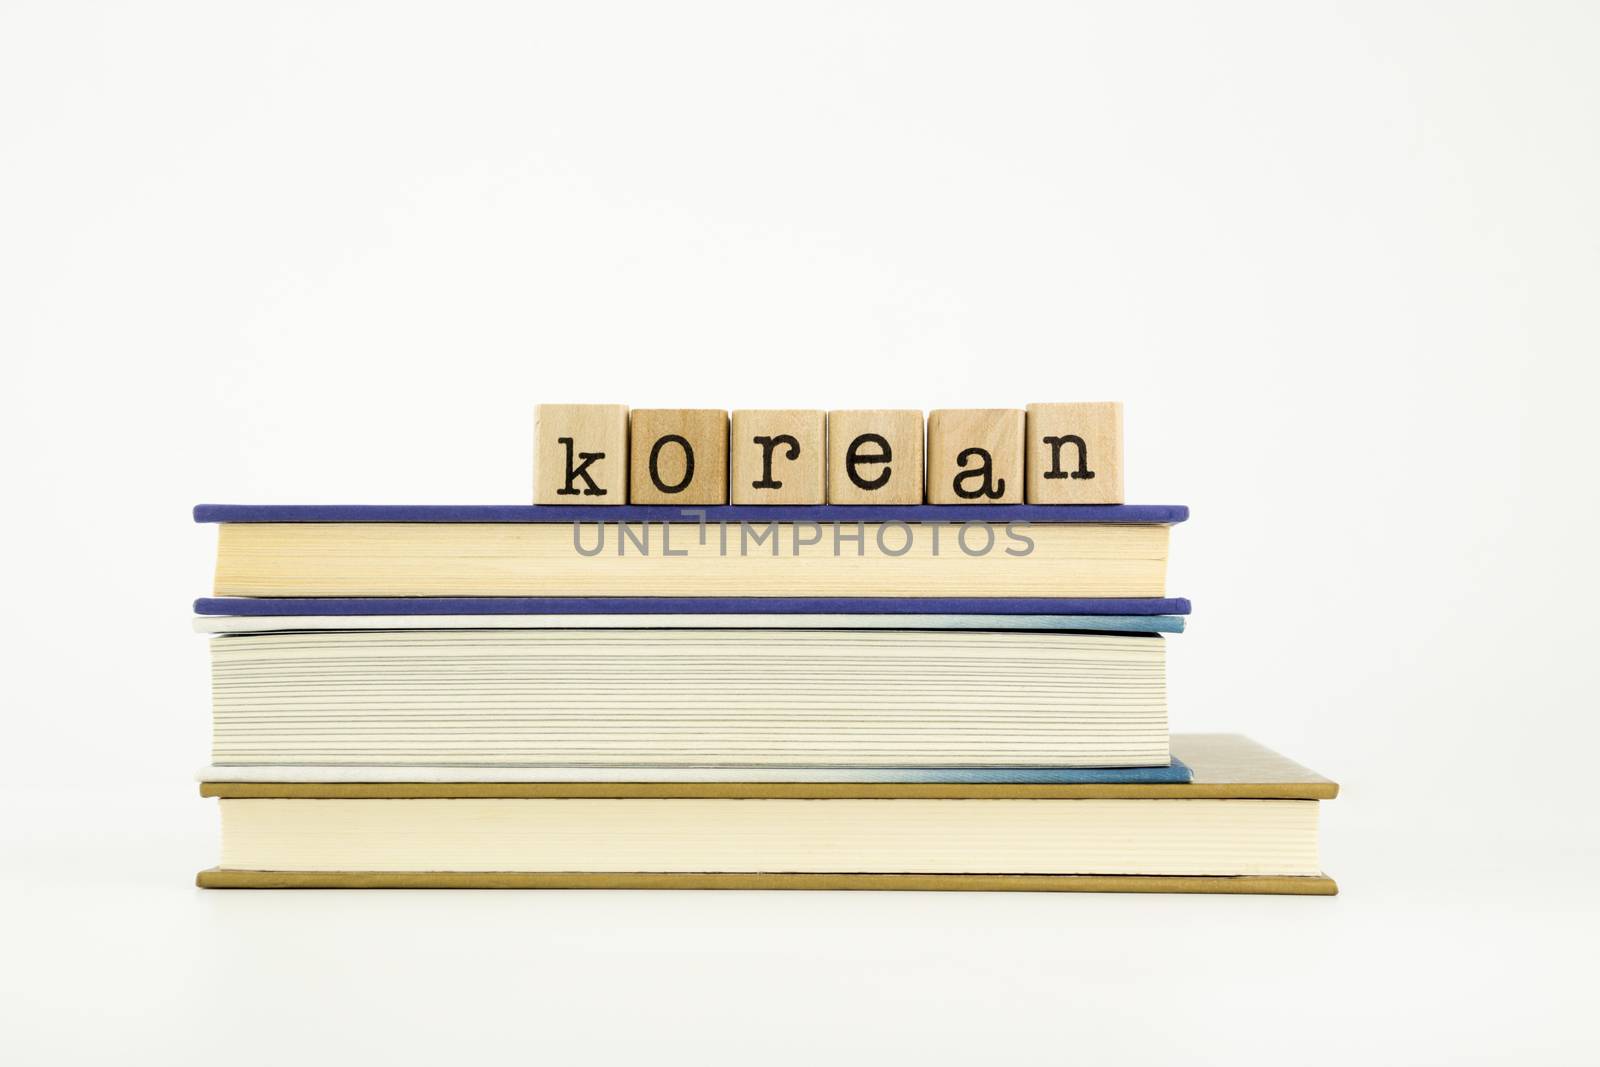 korean word on wood stamps stack on books, language and education concept